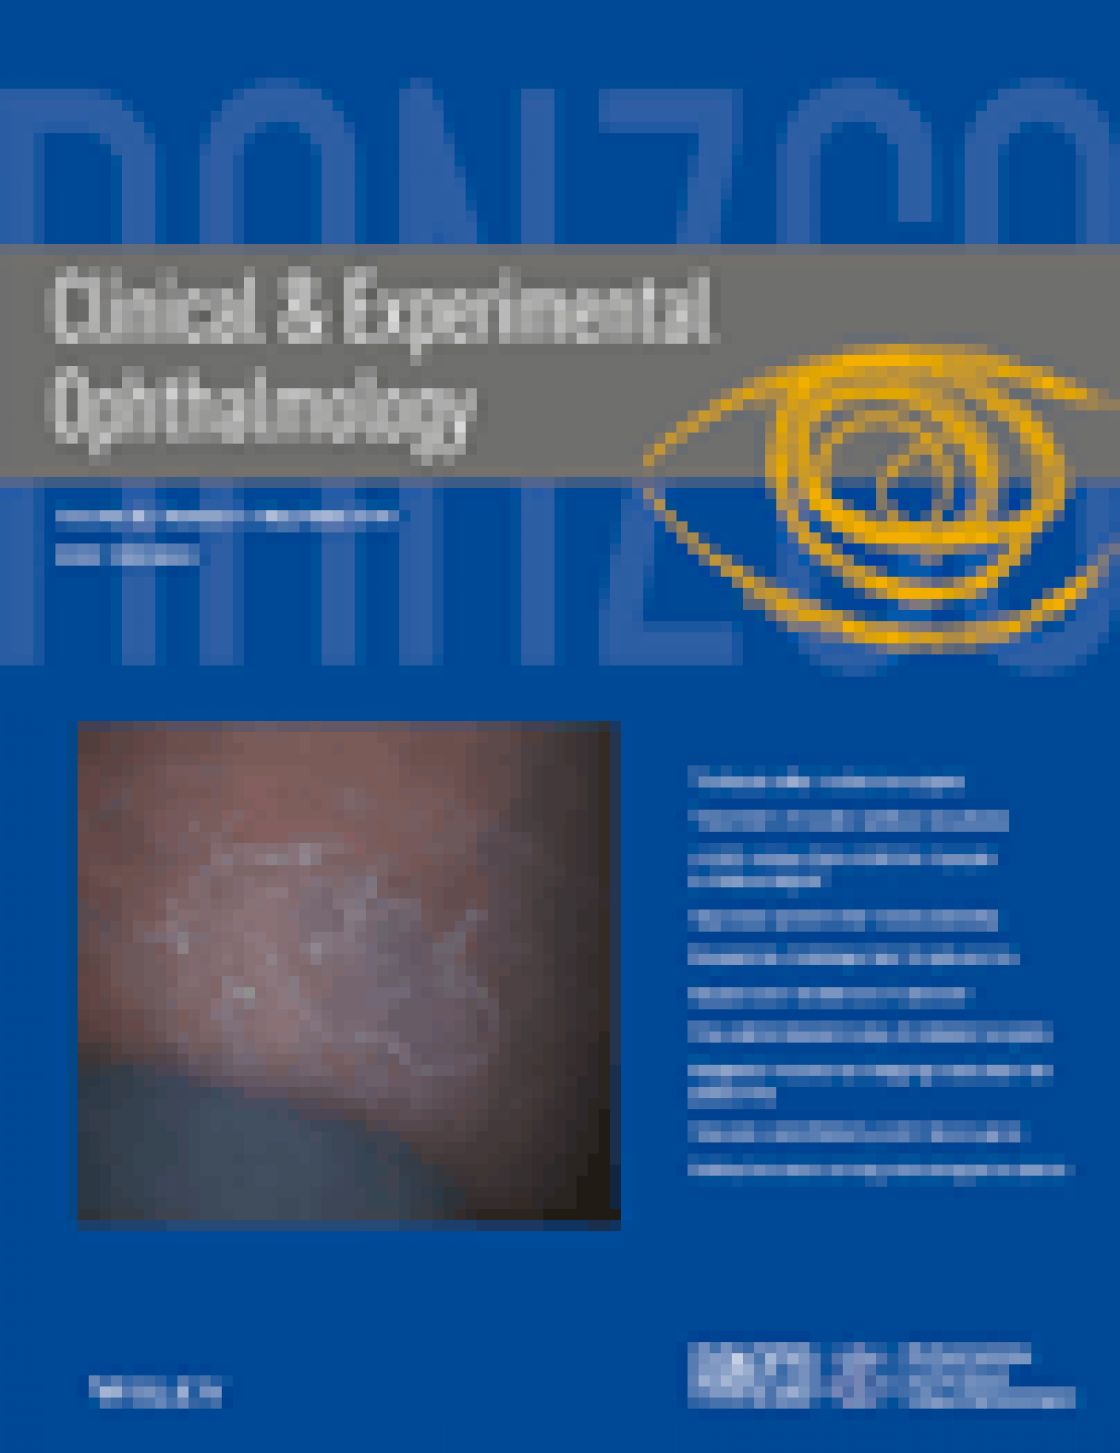 Laser-assisted subepithelial keratectomy versus epipolis laser in situ keratomileusis for myopia: a meta-analysis of clinical outcomes